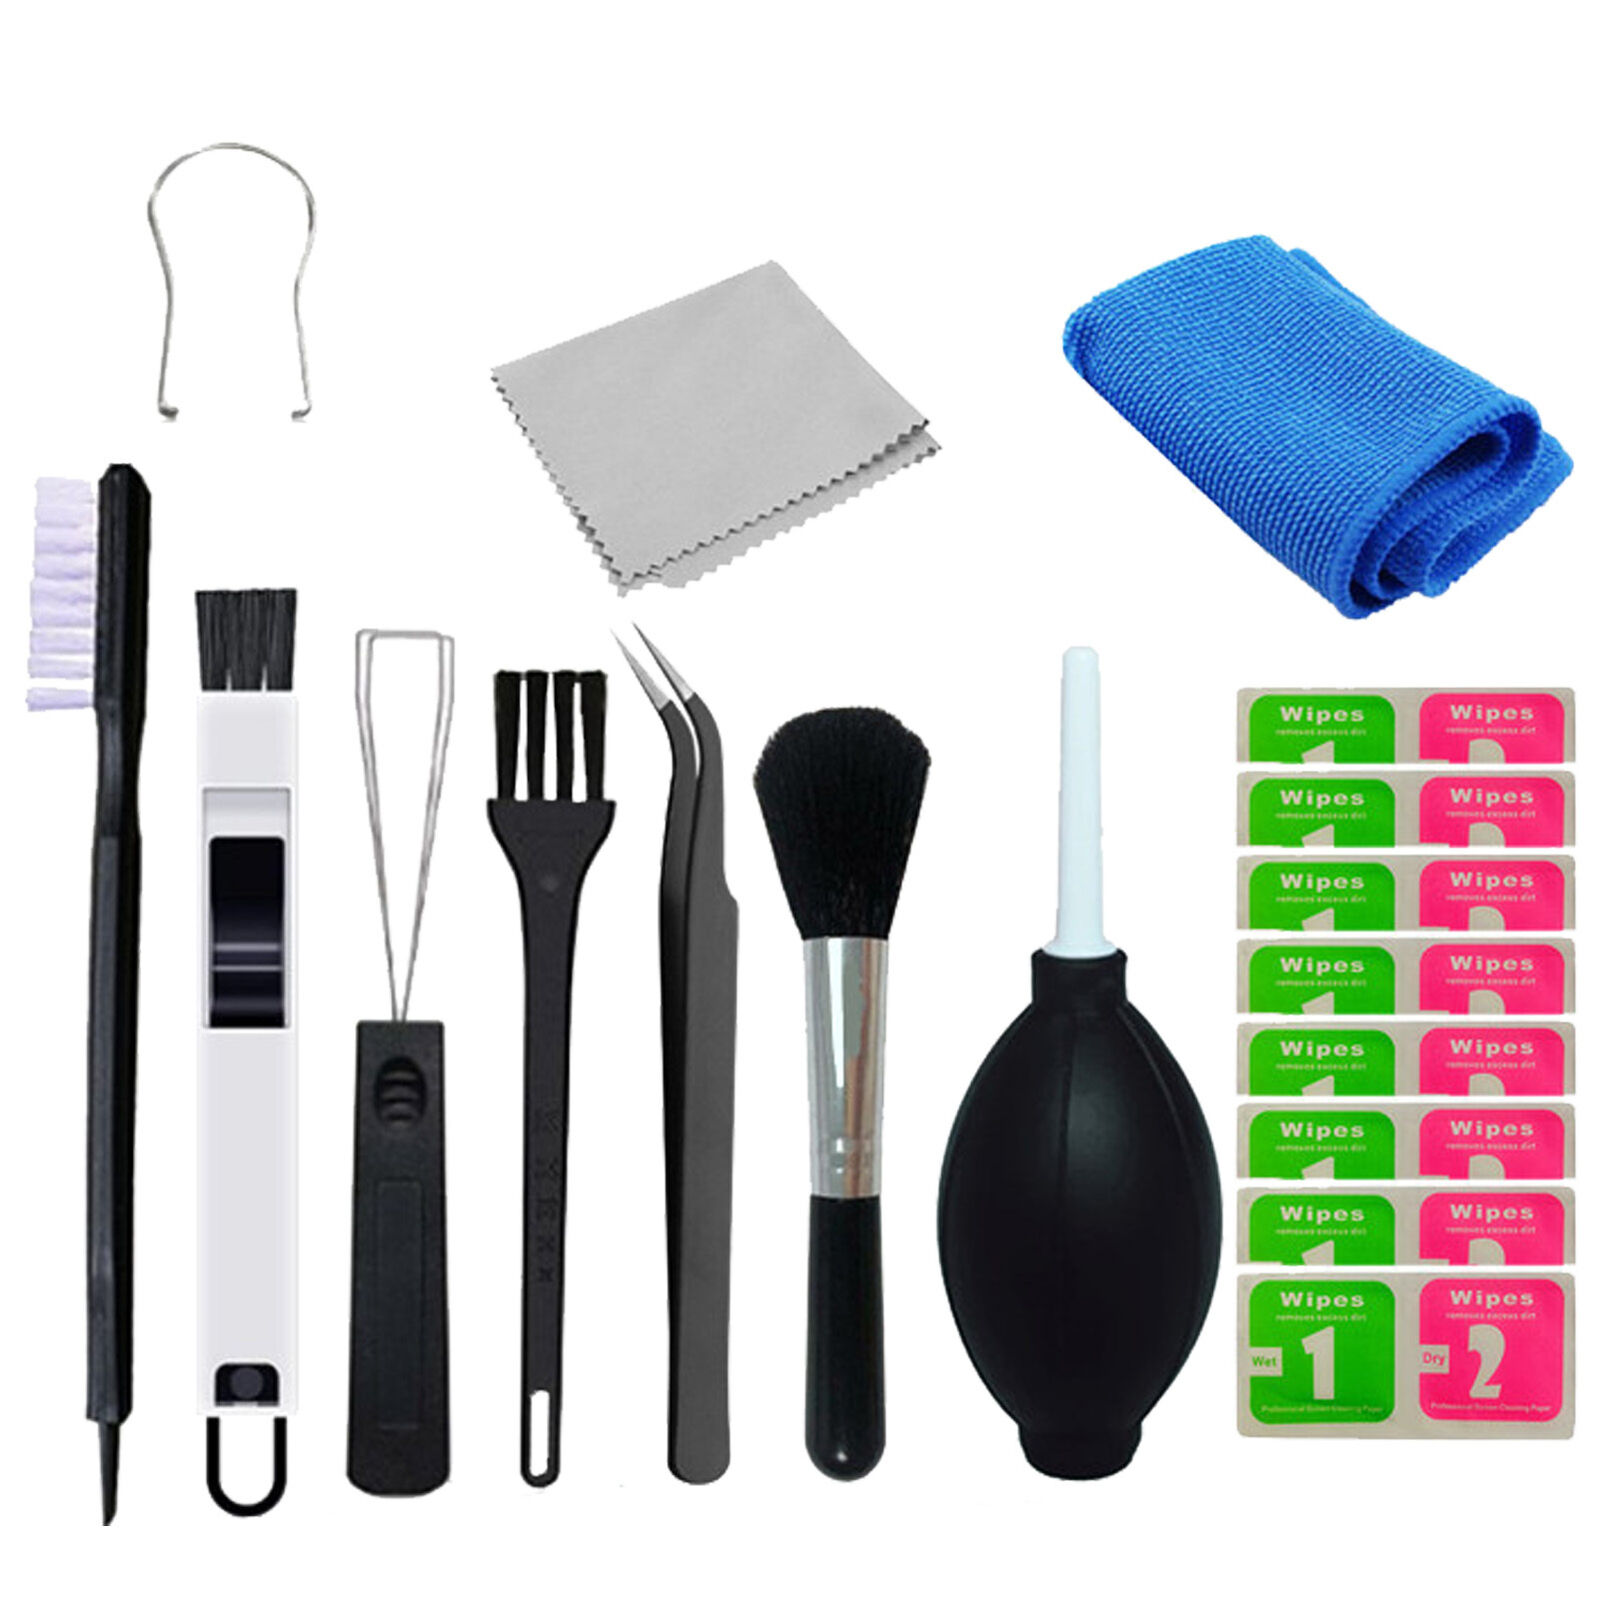 11 in 1 Keyboard Cleaninb/Remover Tool Laptop Corner Dust Cleaning Brush Tools